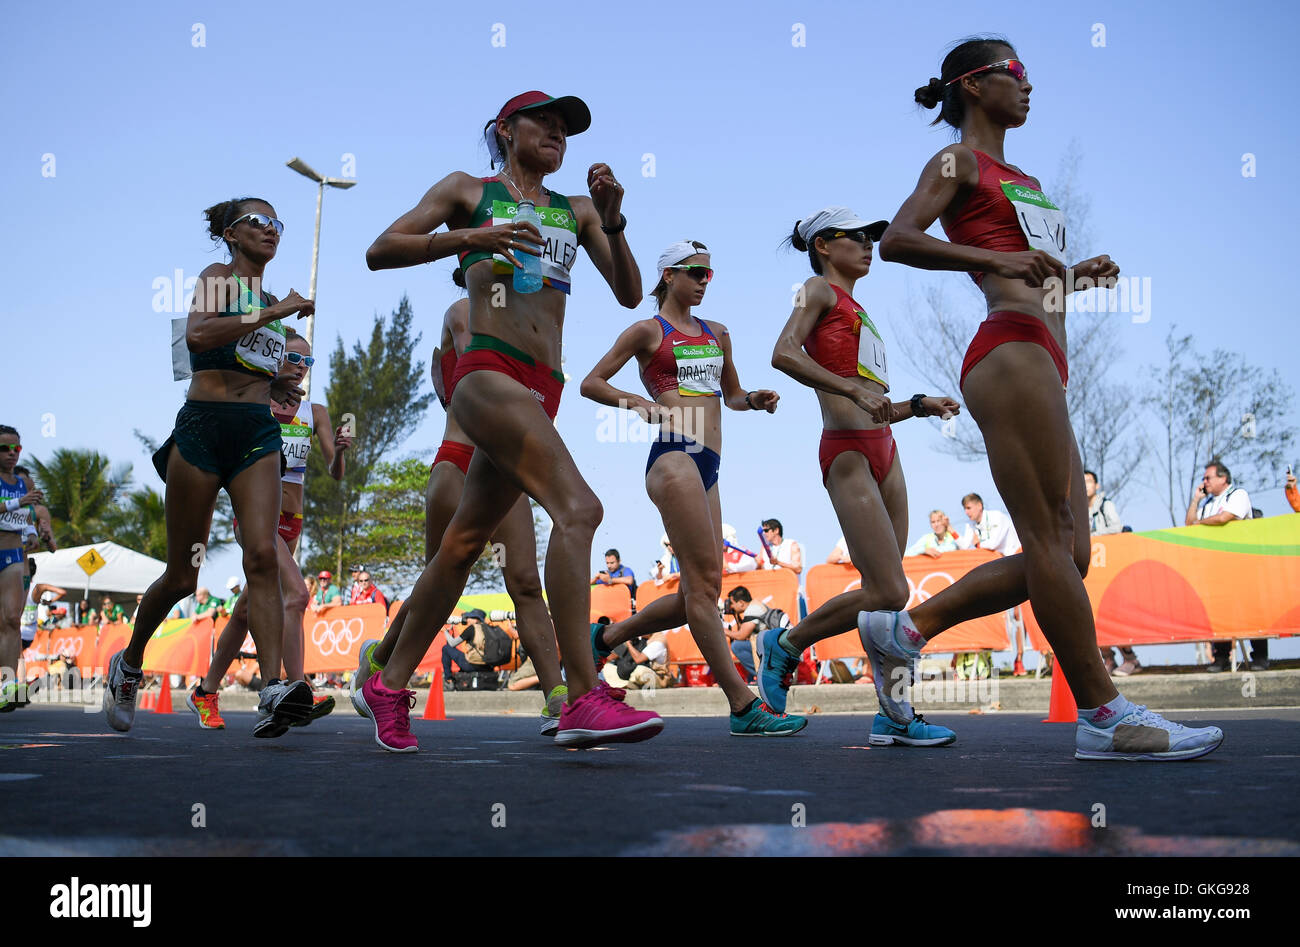 Rio de Janeiro, Brazil. 19th August, 2016. Hong LIU of China leads the pack during the womens 20km race walk on Day 14 of the 2016 Rio Olympics at Pontal on August 19, 2016 in Rio de Janeiro, Brazil. (Photo by Roger Sedres/Gallo Images) Credit:  Roger Sedres/Alamy Live News Stock Photo